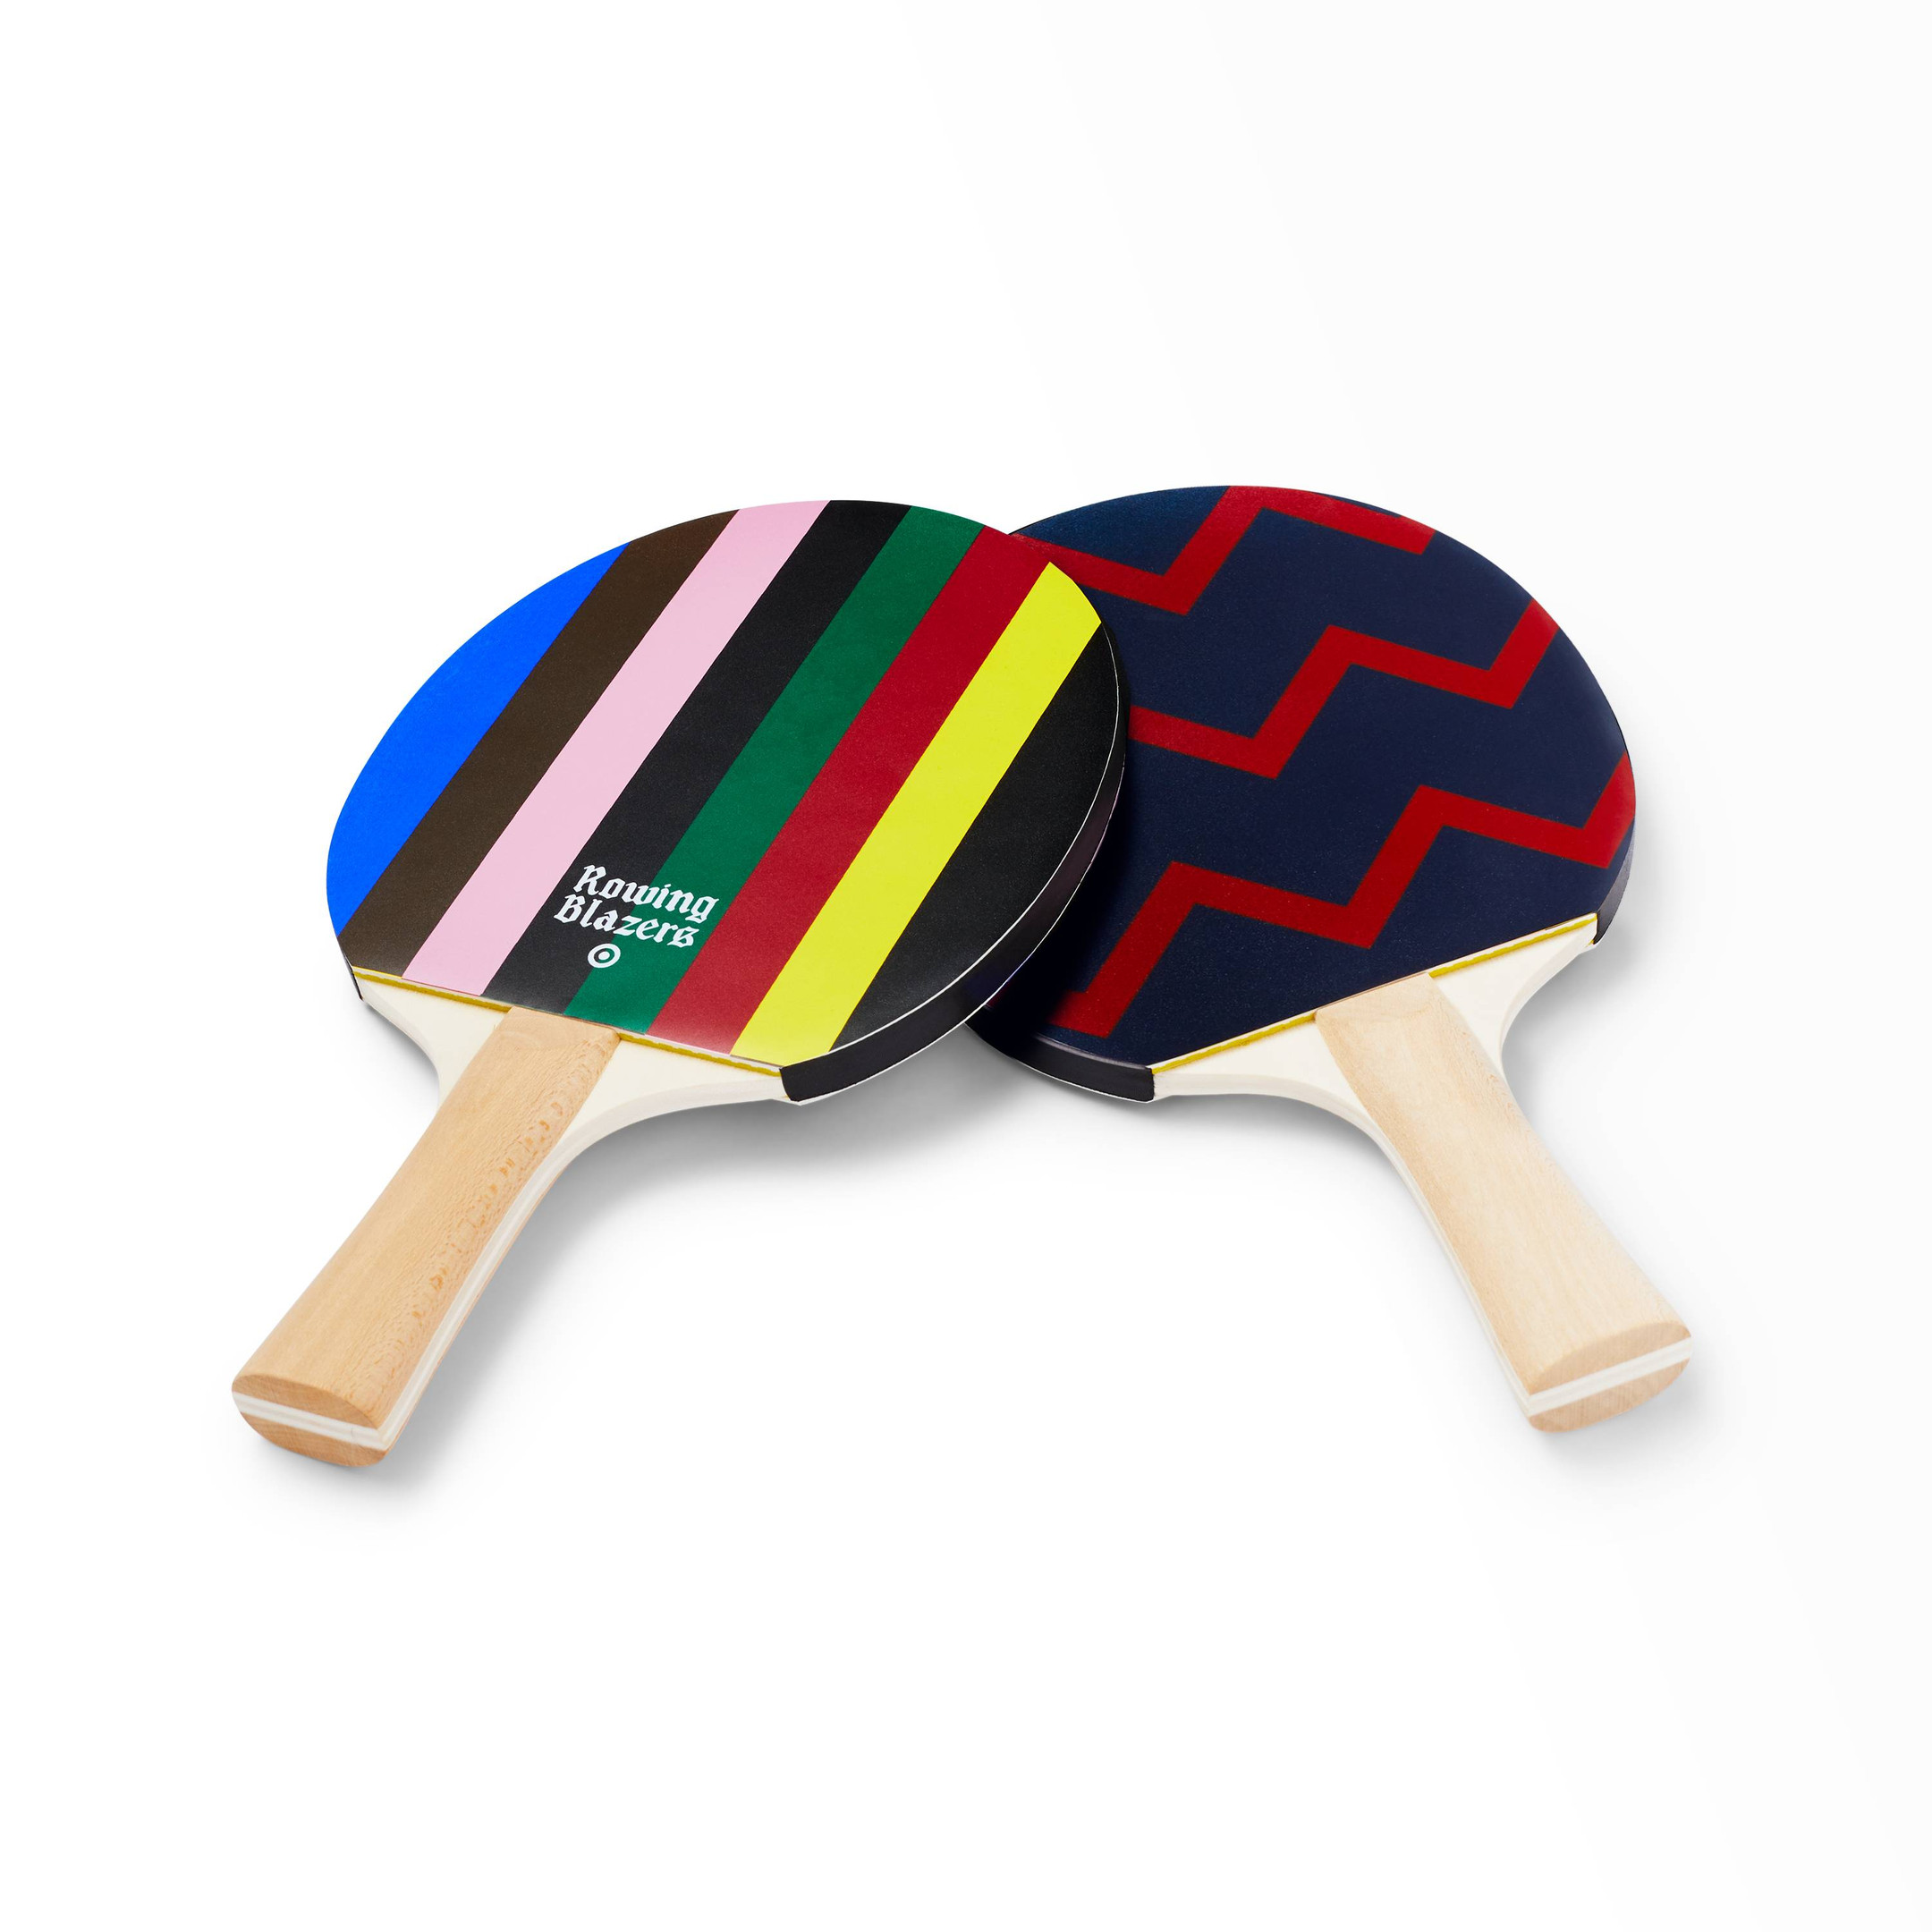 Croquet Stripe and Zig Zag Ping Pong Paddle Set - Rowing Blazers x Target